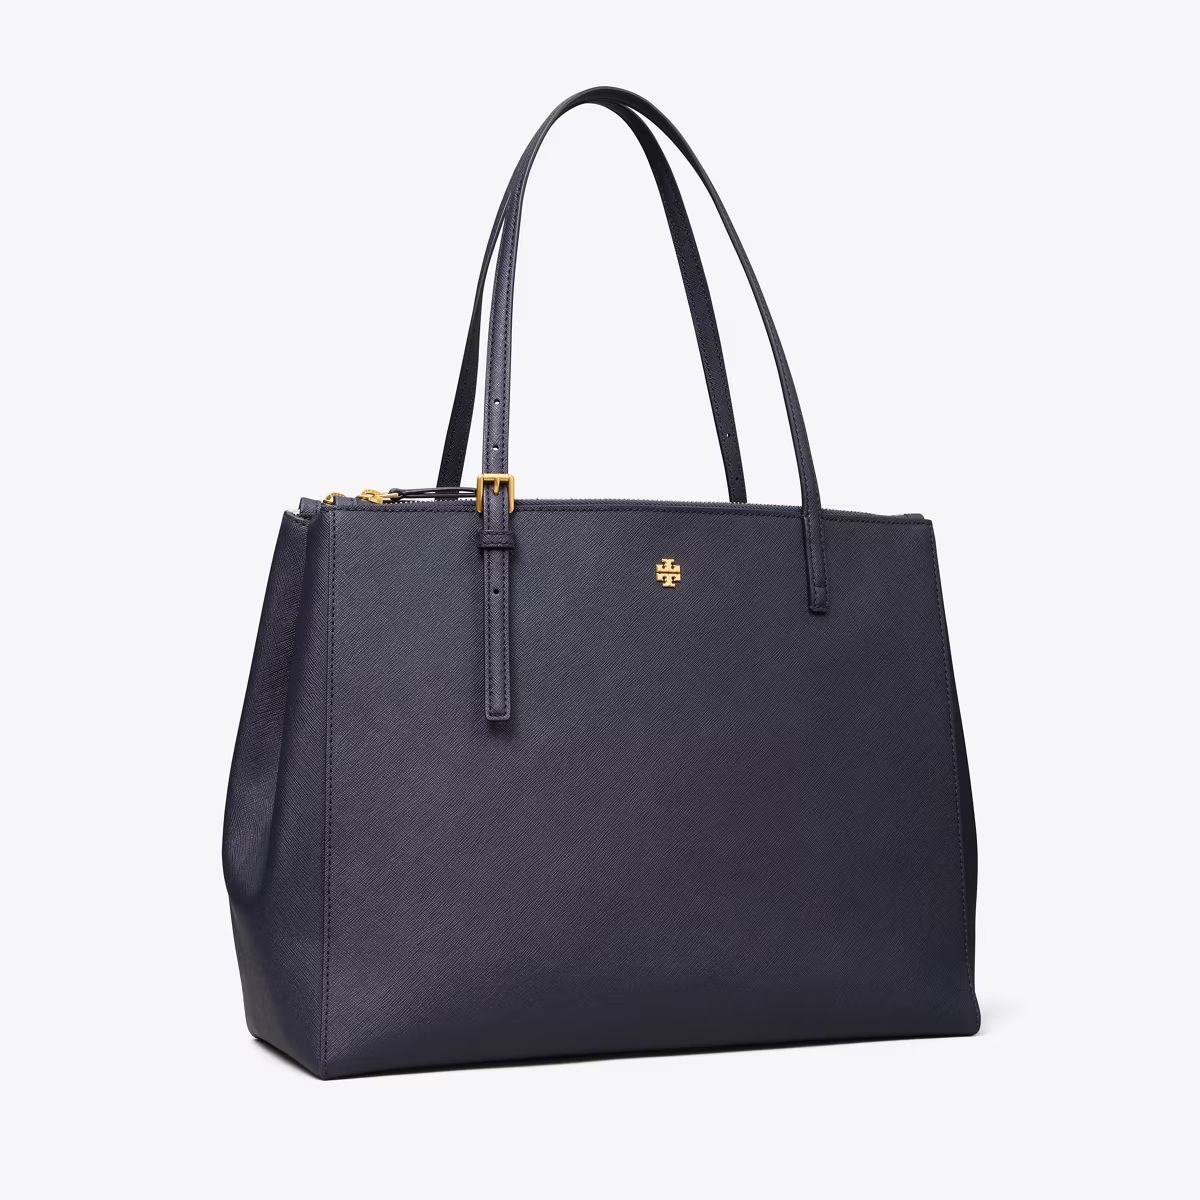 EMERSON LARGE DOUBLE ZIP TOTE | Tory Burch (US)